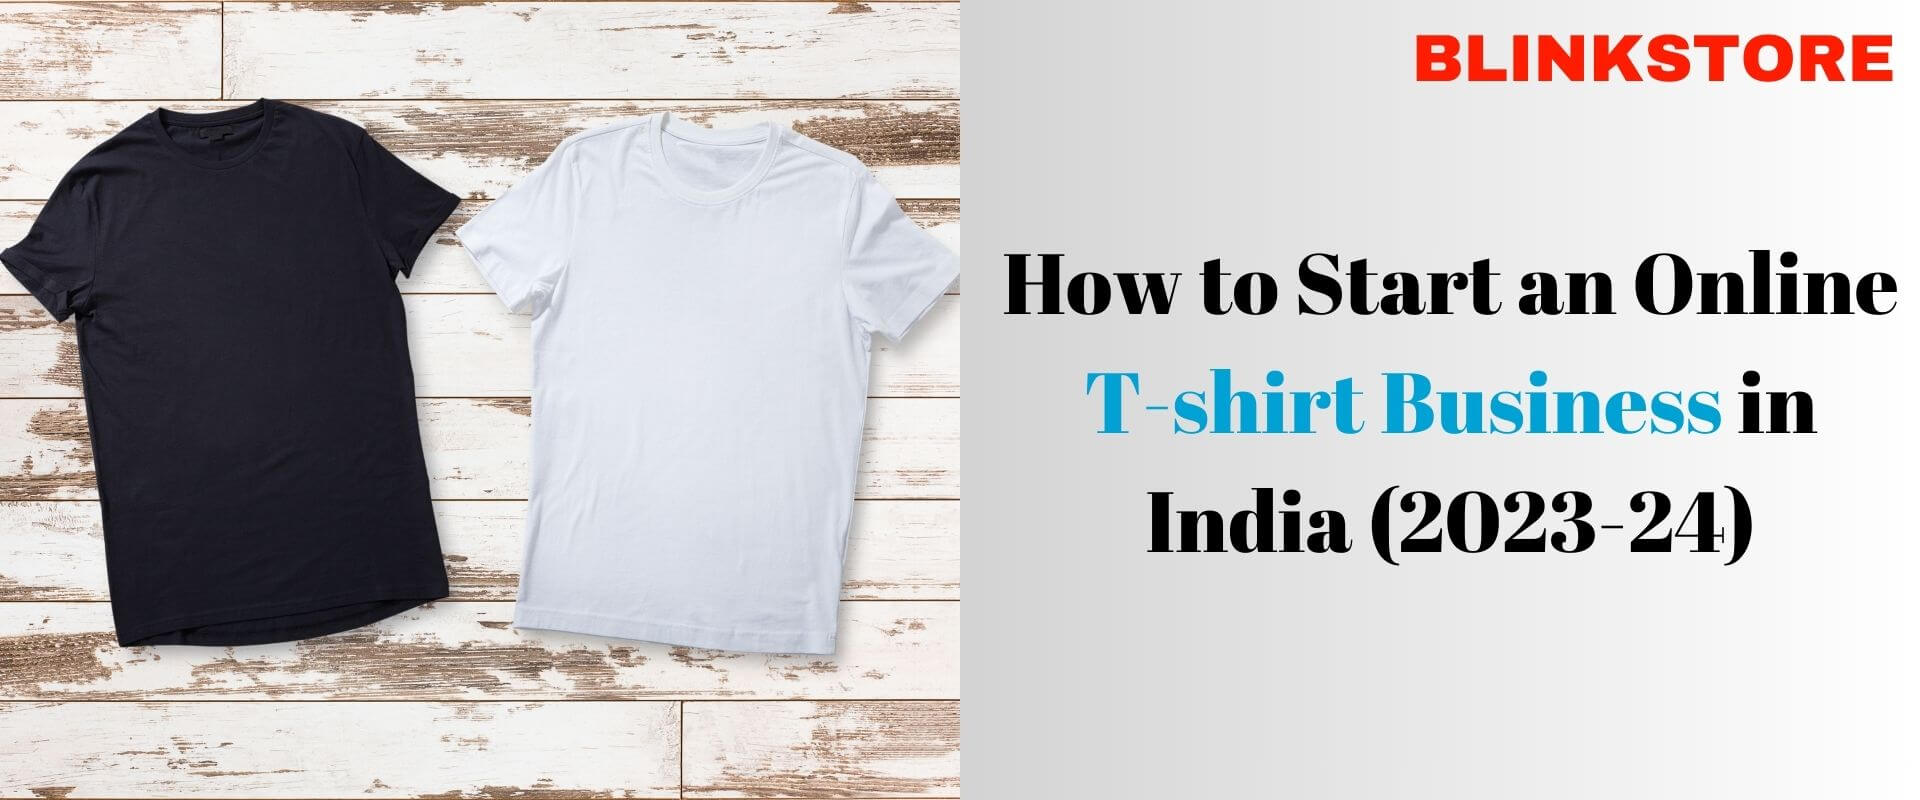 How to Start an Online T-shirt Business in India (2023-24)